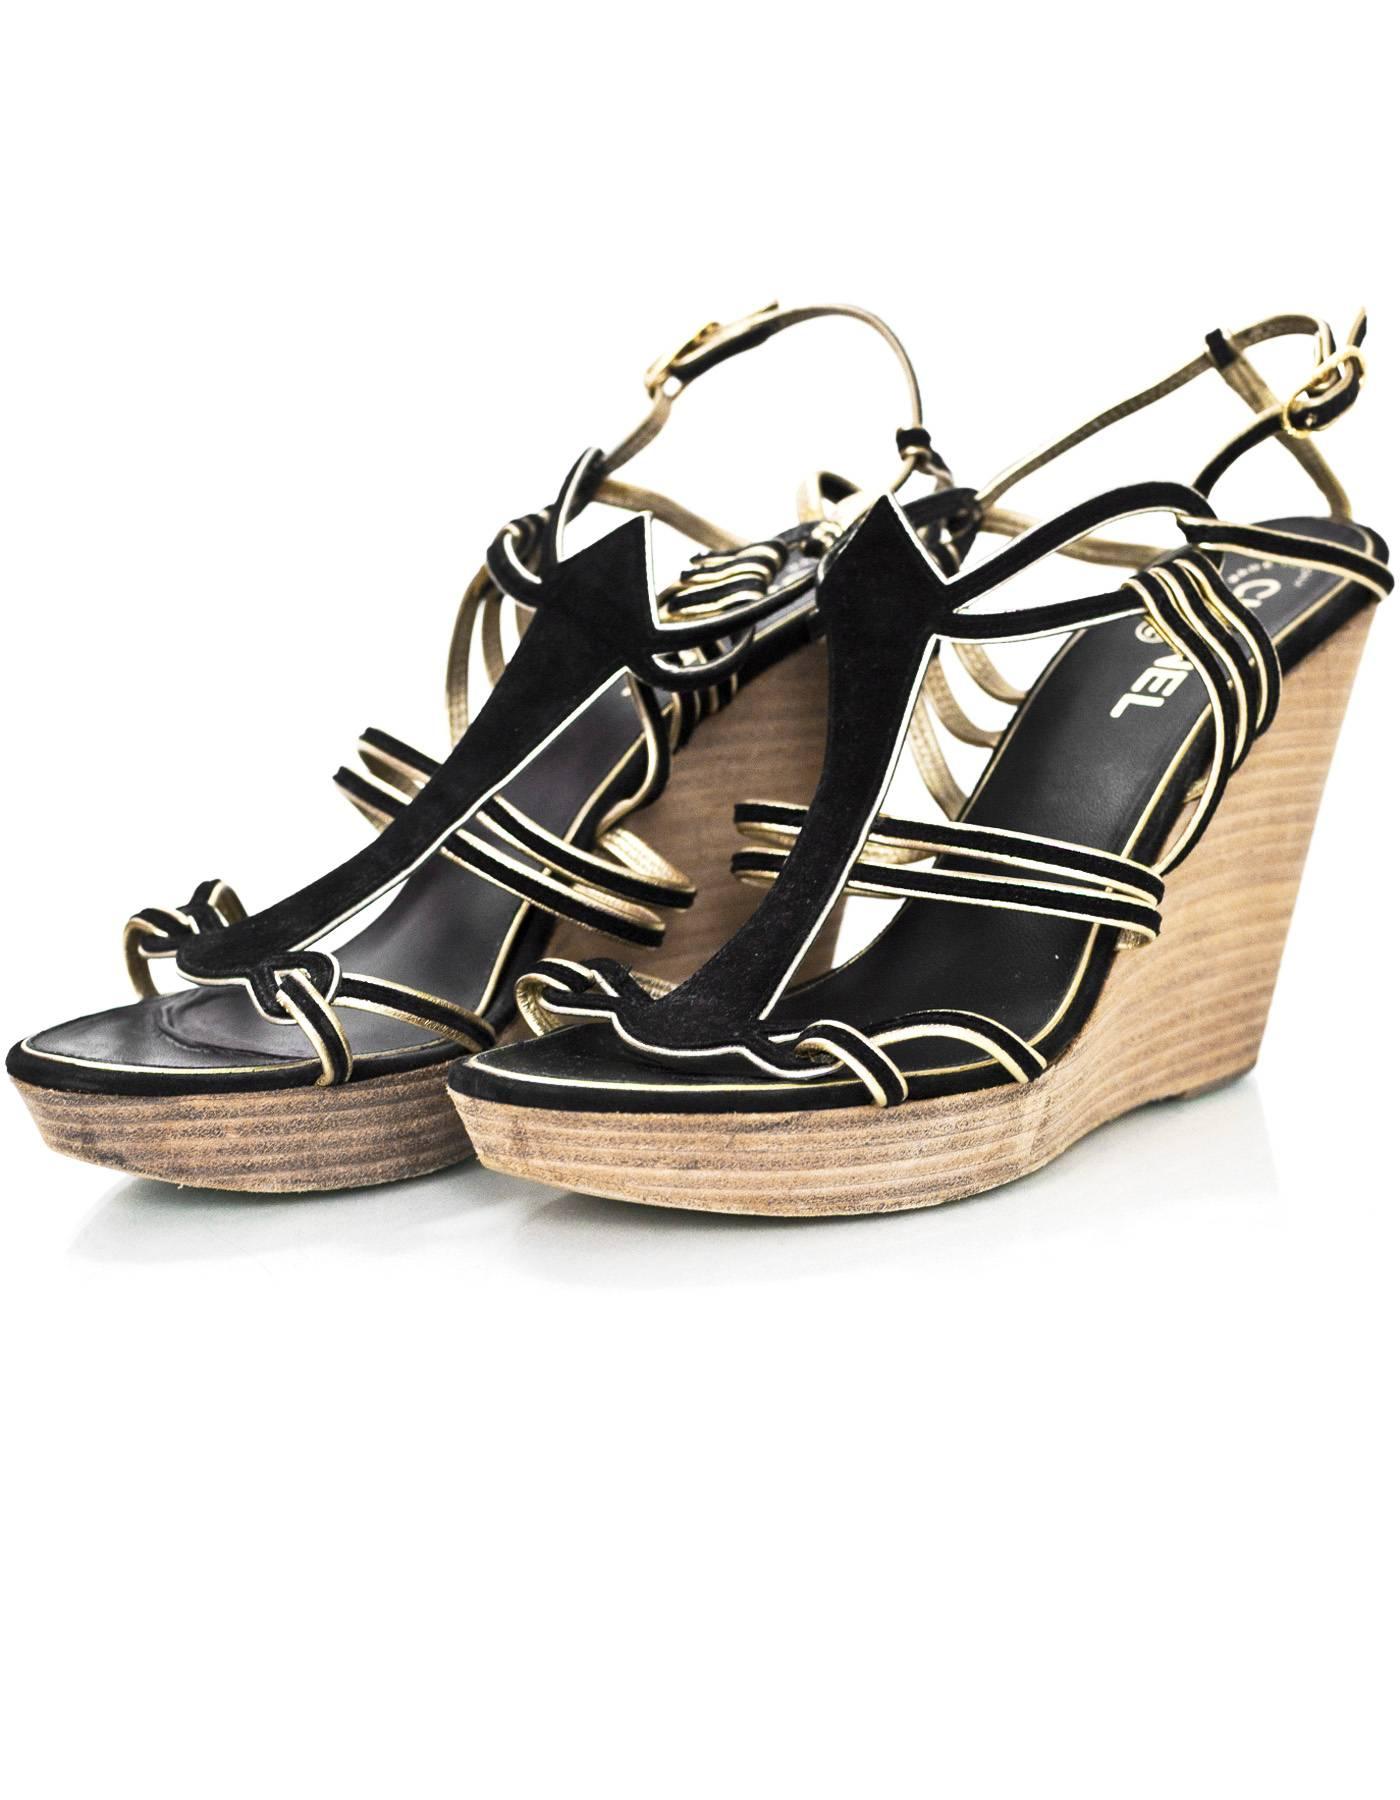 Chanel Black Suede Wedge Sandals Sz 40

Features gold trim

Made In: Italy
Color: Black, gold, brown
Materials: Suede
Closure/Opening: Buckle closure at ankle
Sole Stamp: CC Made in Italy 40
Overall Condition: Very good pre-owned condition with the